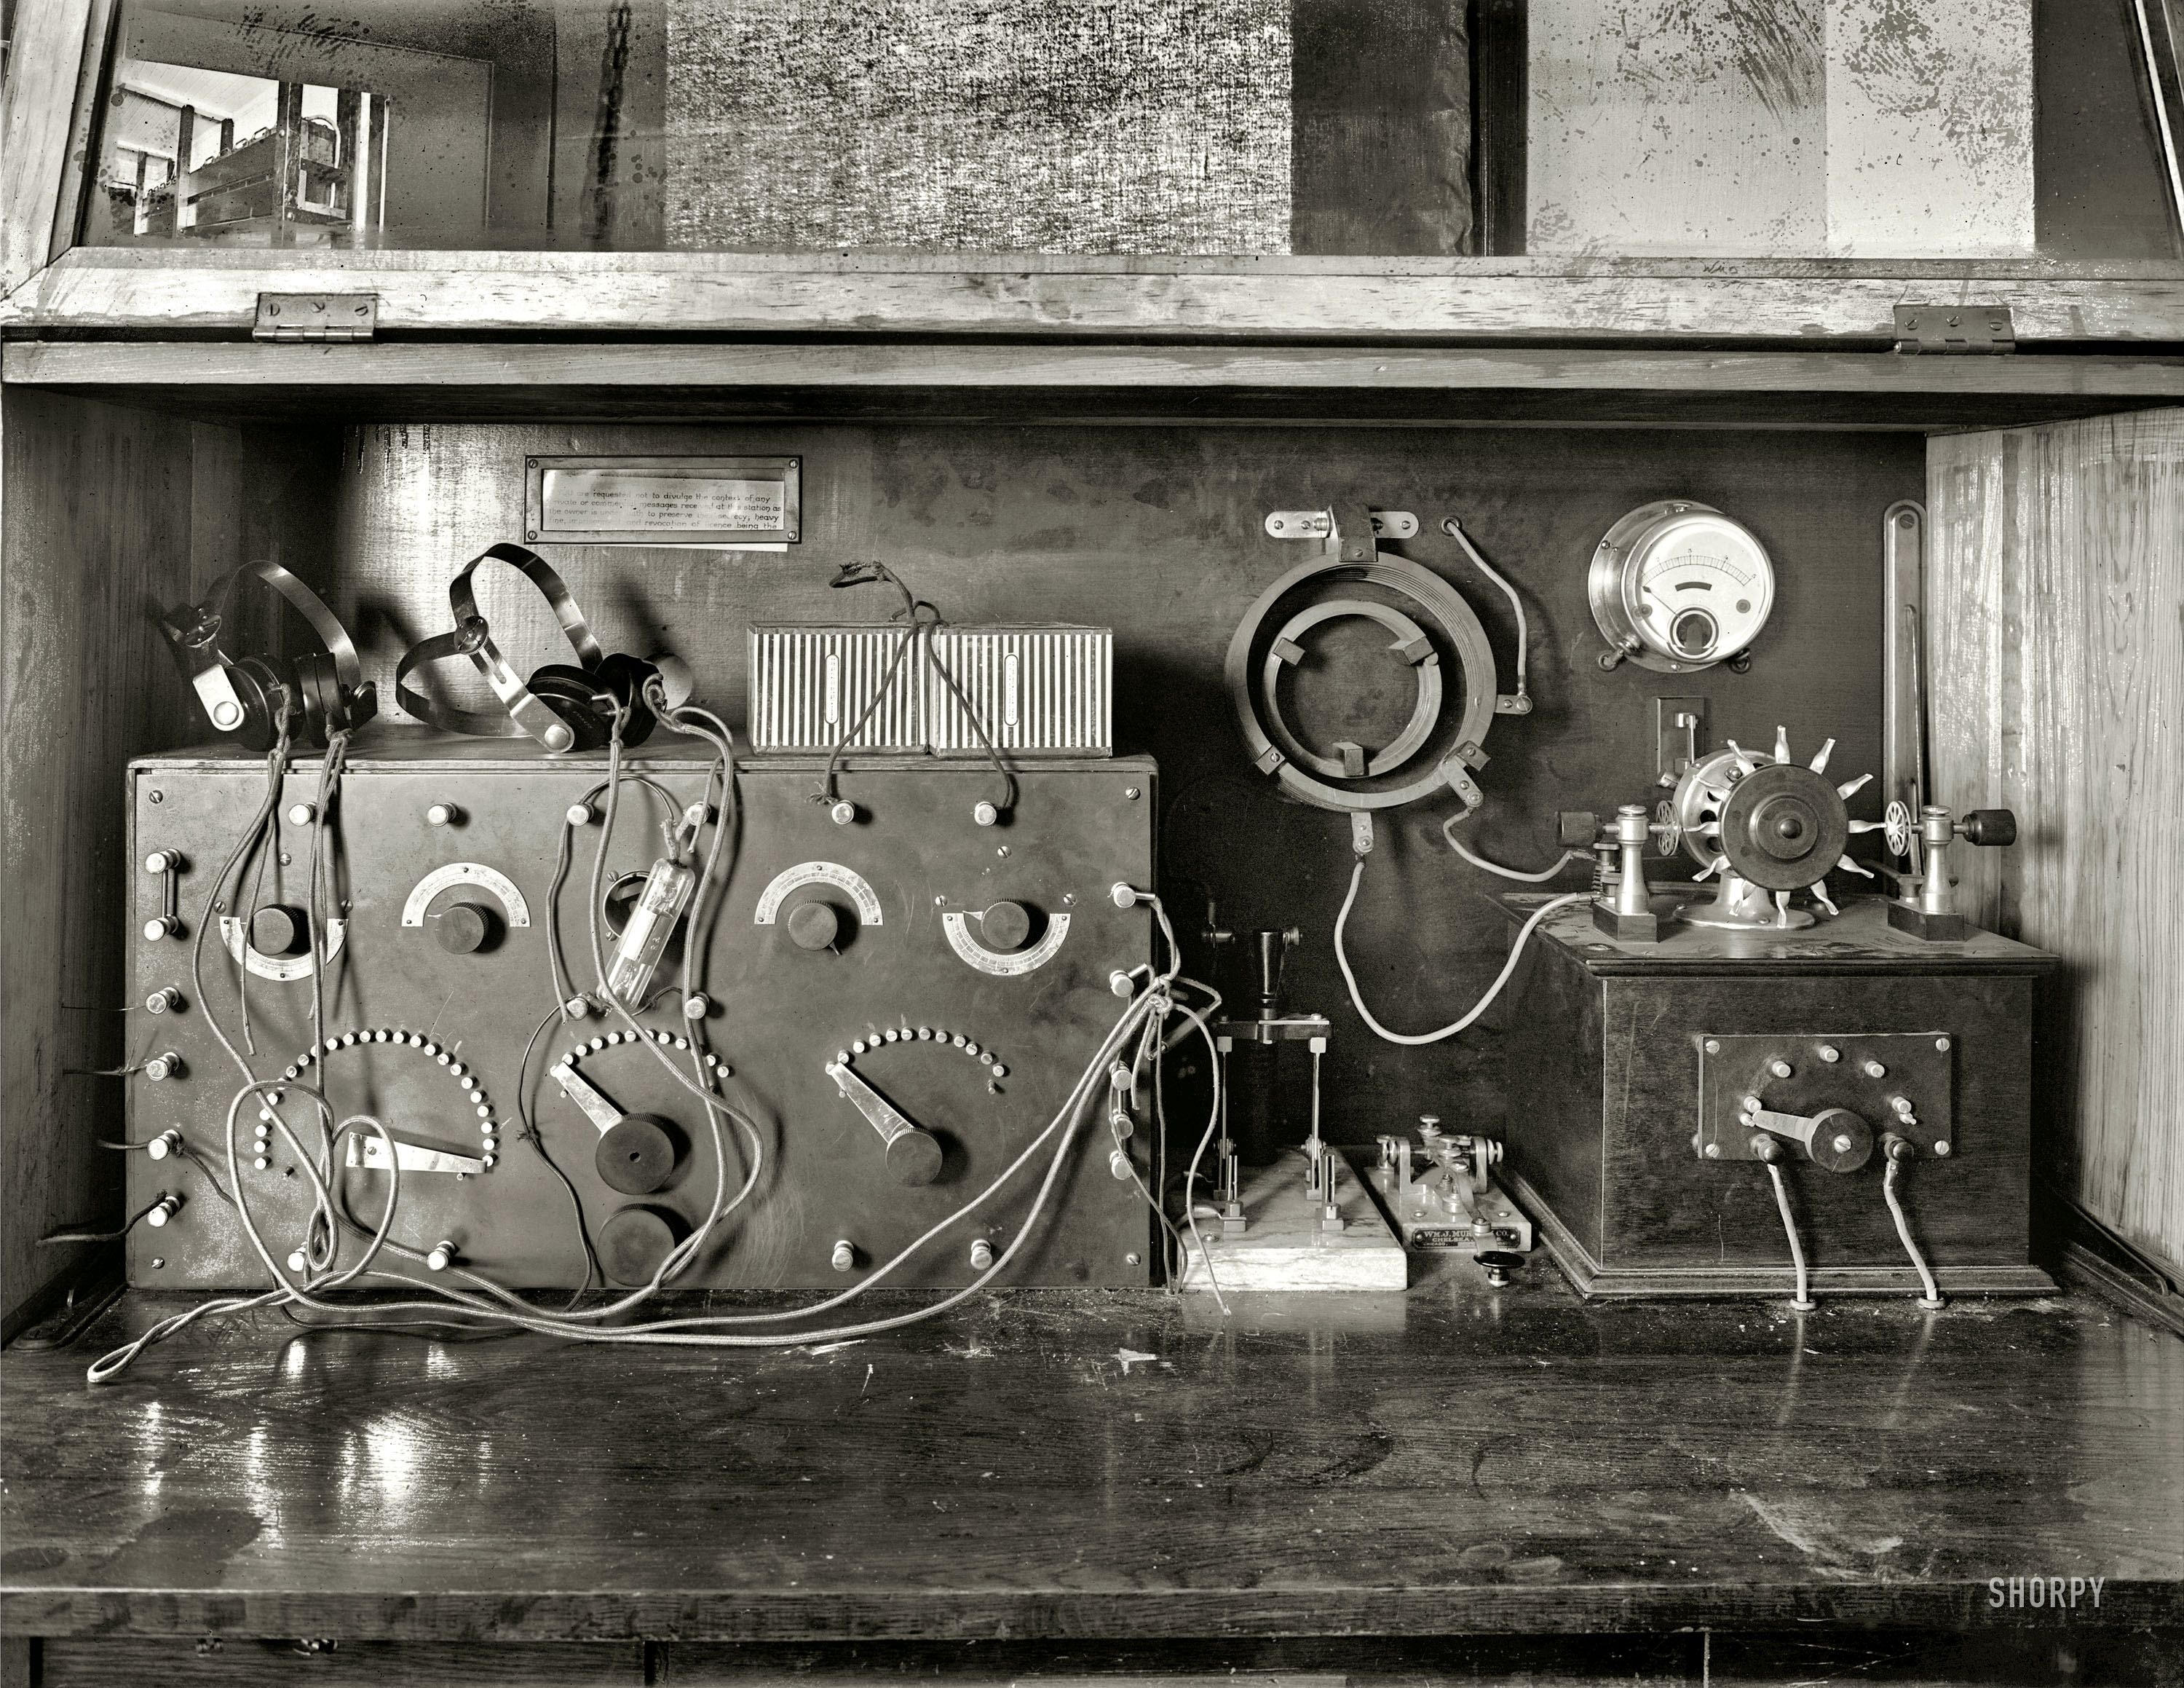 Washington, D.C., circa 1920. "National Radio School." Some of the equipment at the high-tech technical school seen here. National Photo Co. View full size.